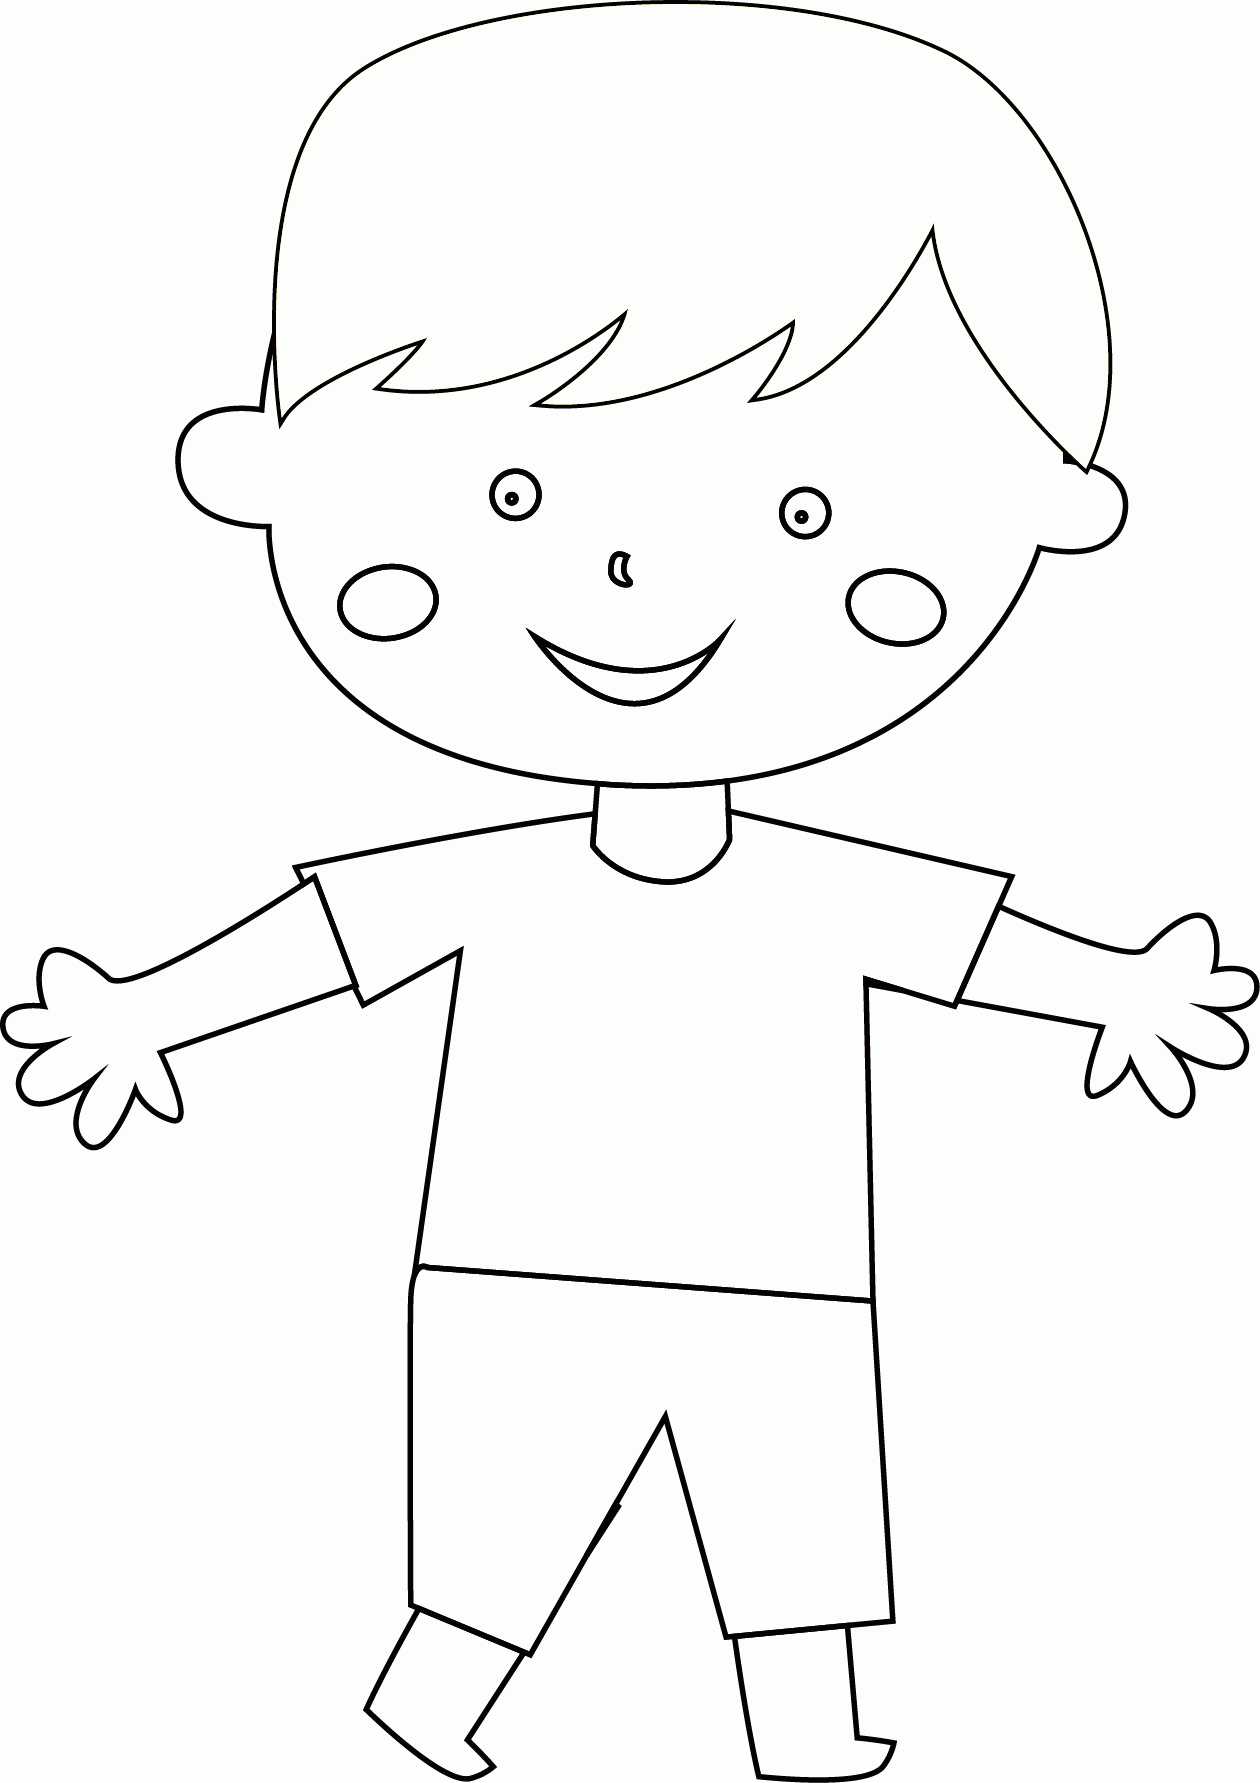 Coloring Page Of A Child - Coloring Home